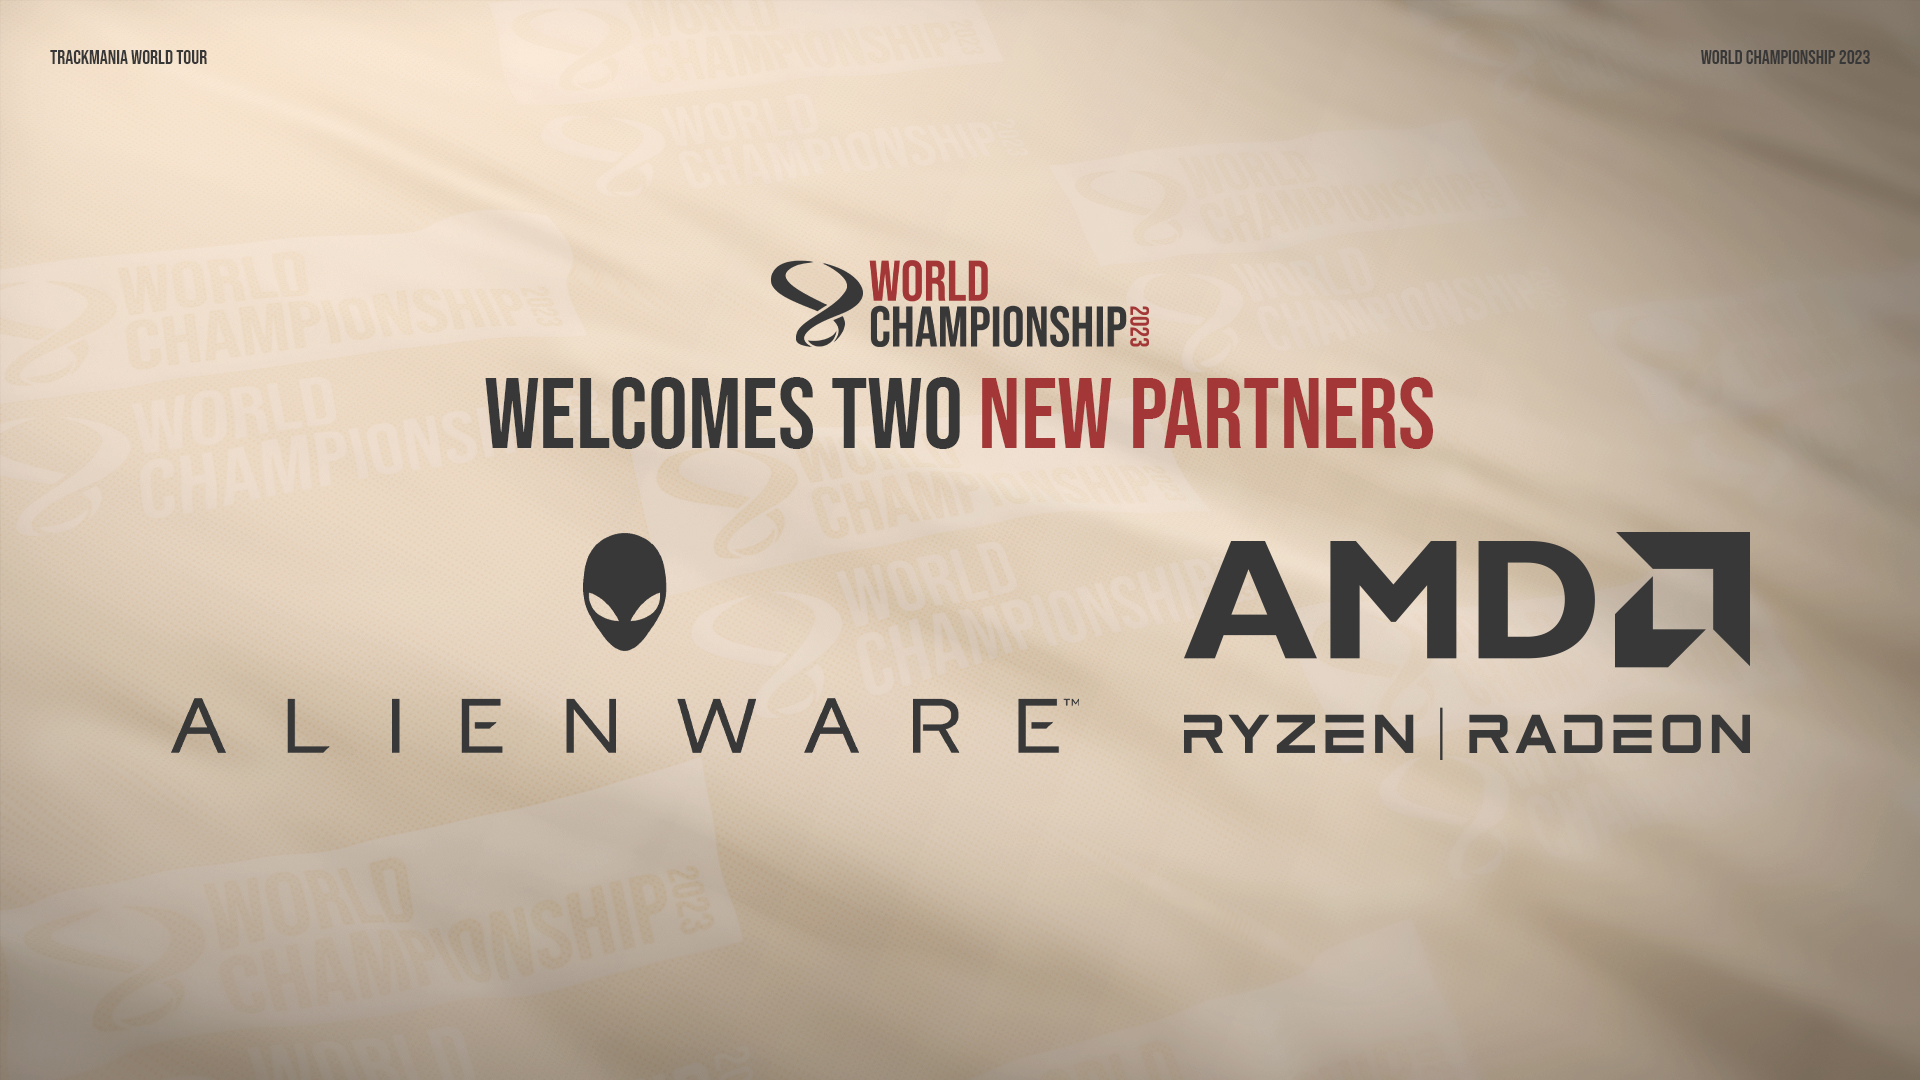 Trackmania World Championship 2023 unveils two new partners: Alienware & AMD